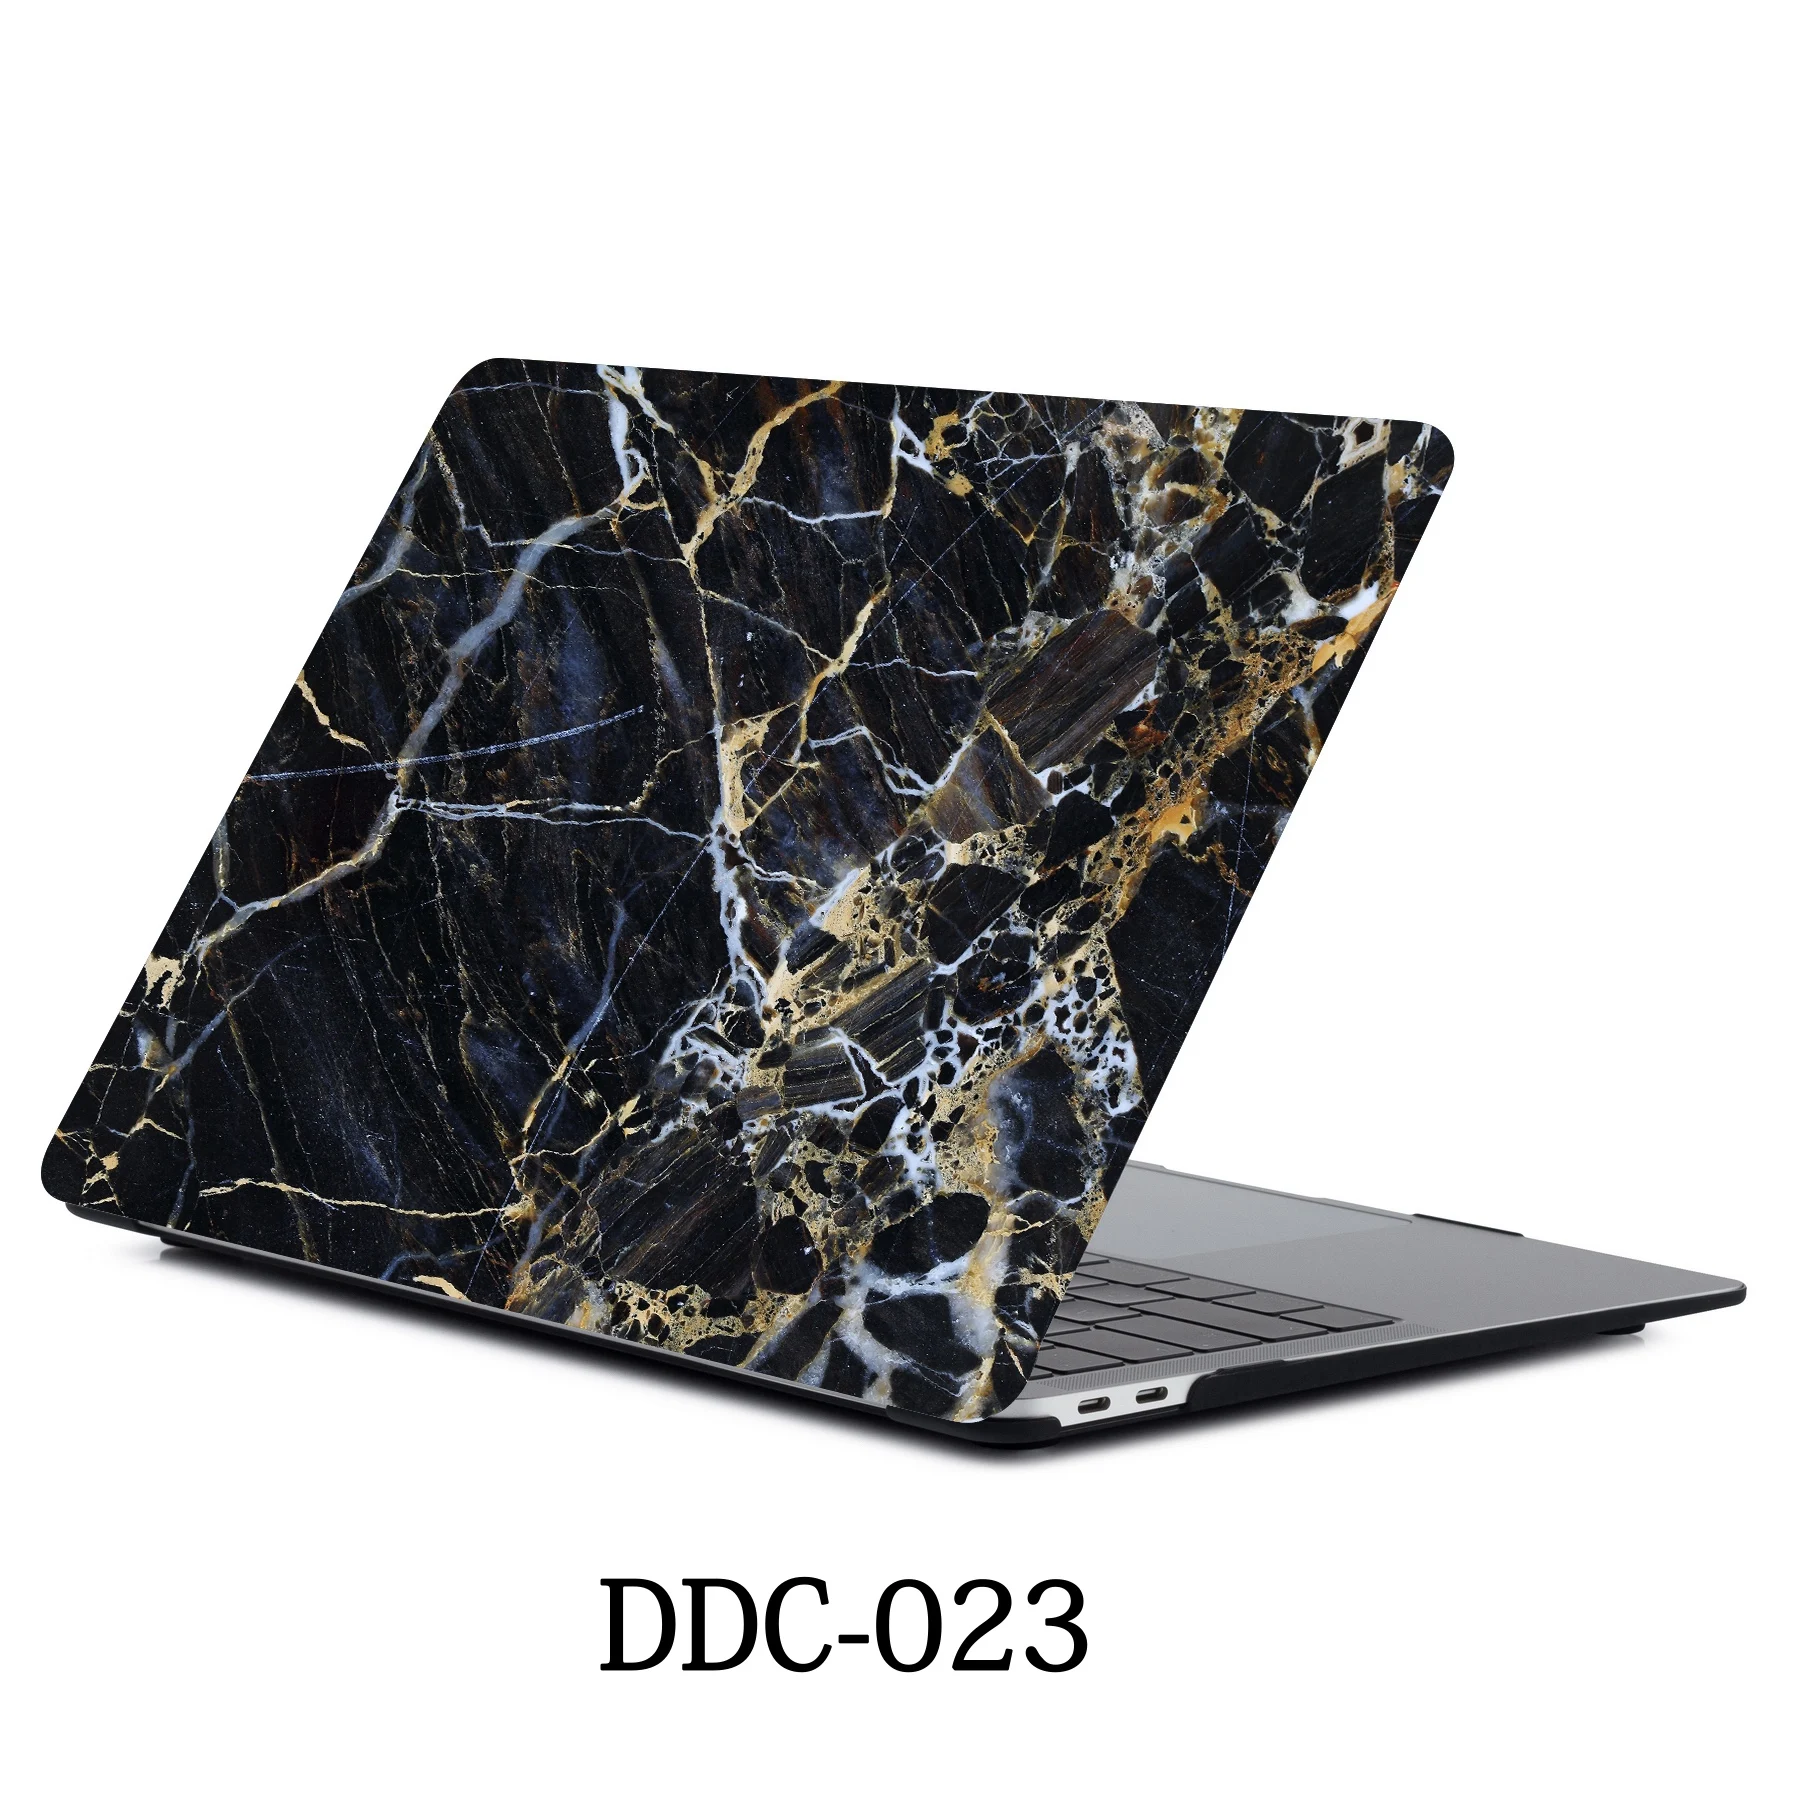 
Protective PVC Laptop Skin Stickers Vinyl For Lenovo Huawei Macbook Pro Stickers With 3D Decal Body Skin 